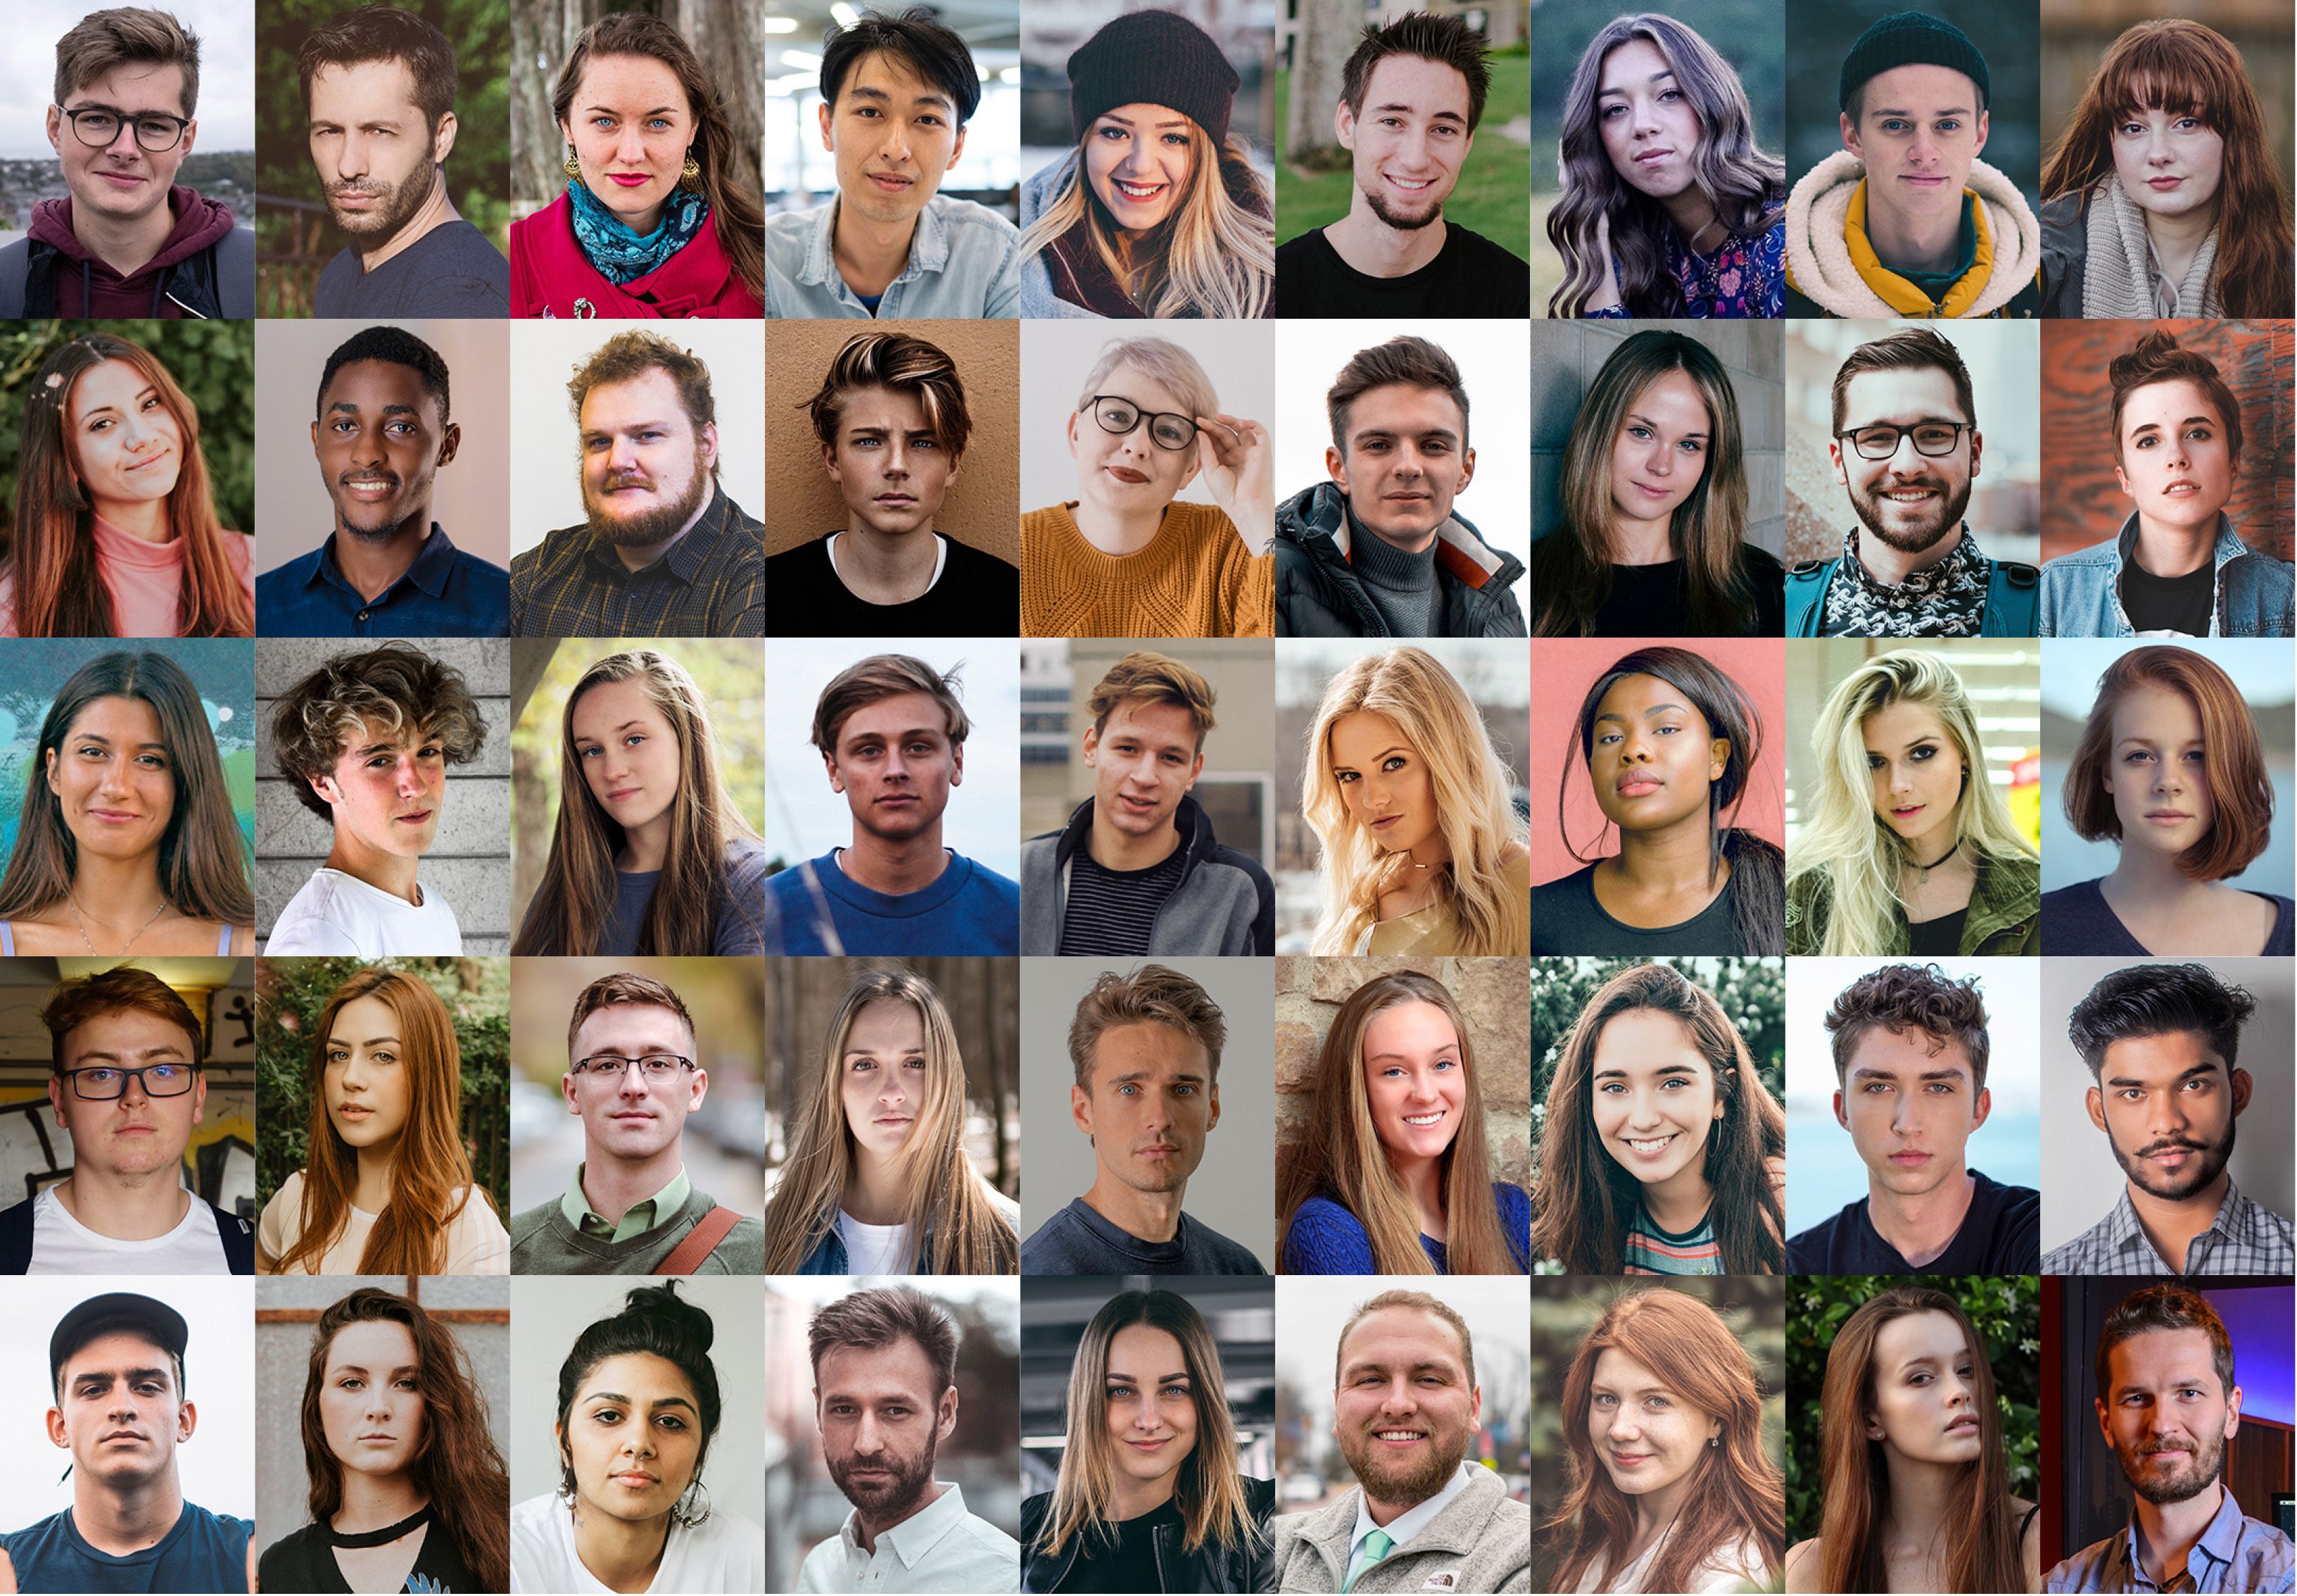 A collage of images of 45 students facing the camera. The majority of the students are white, with minimal diversity.